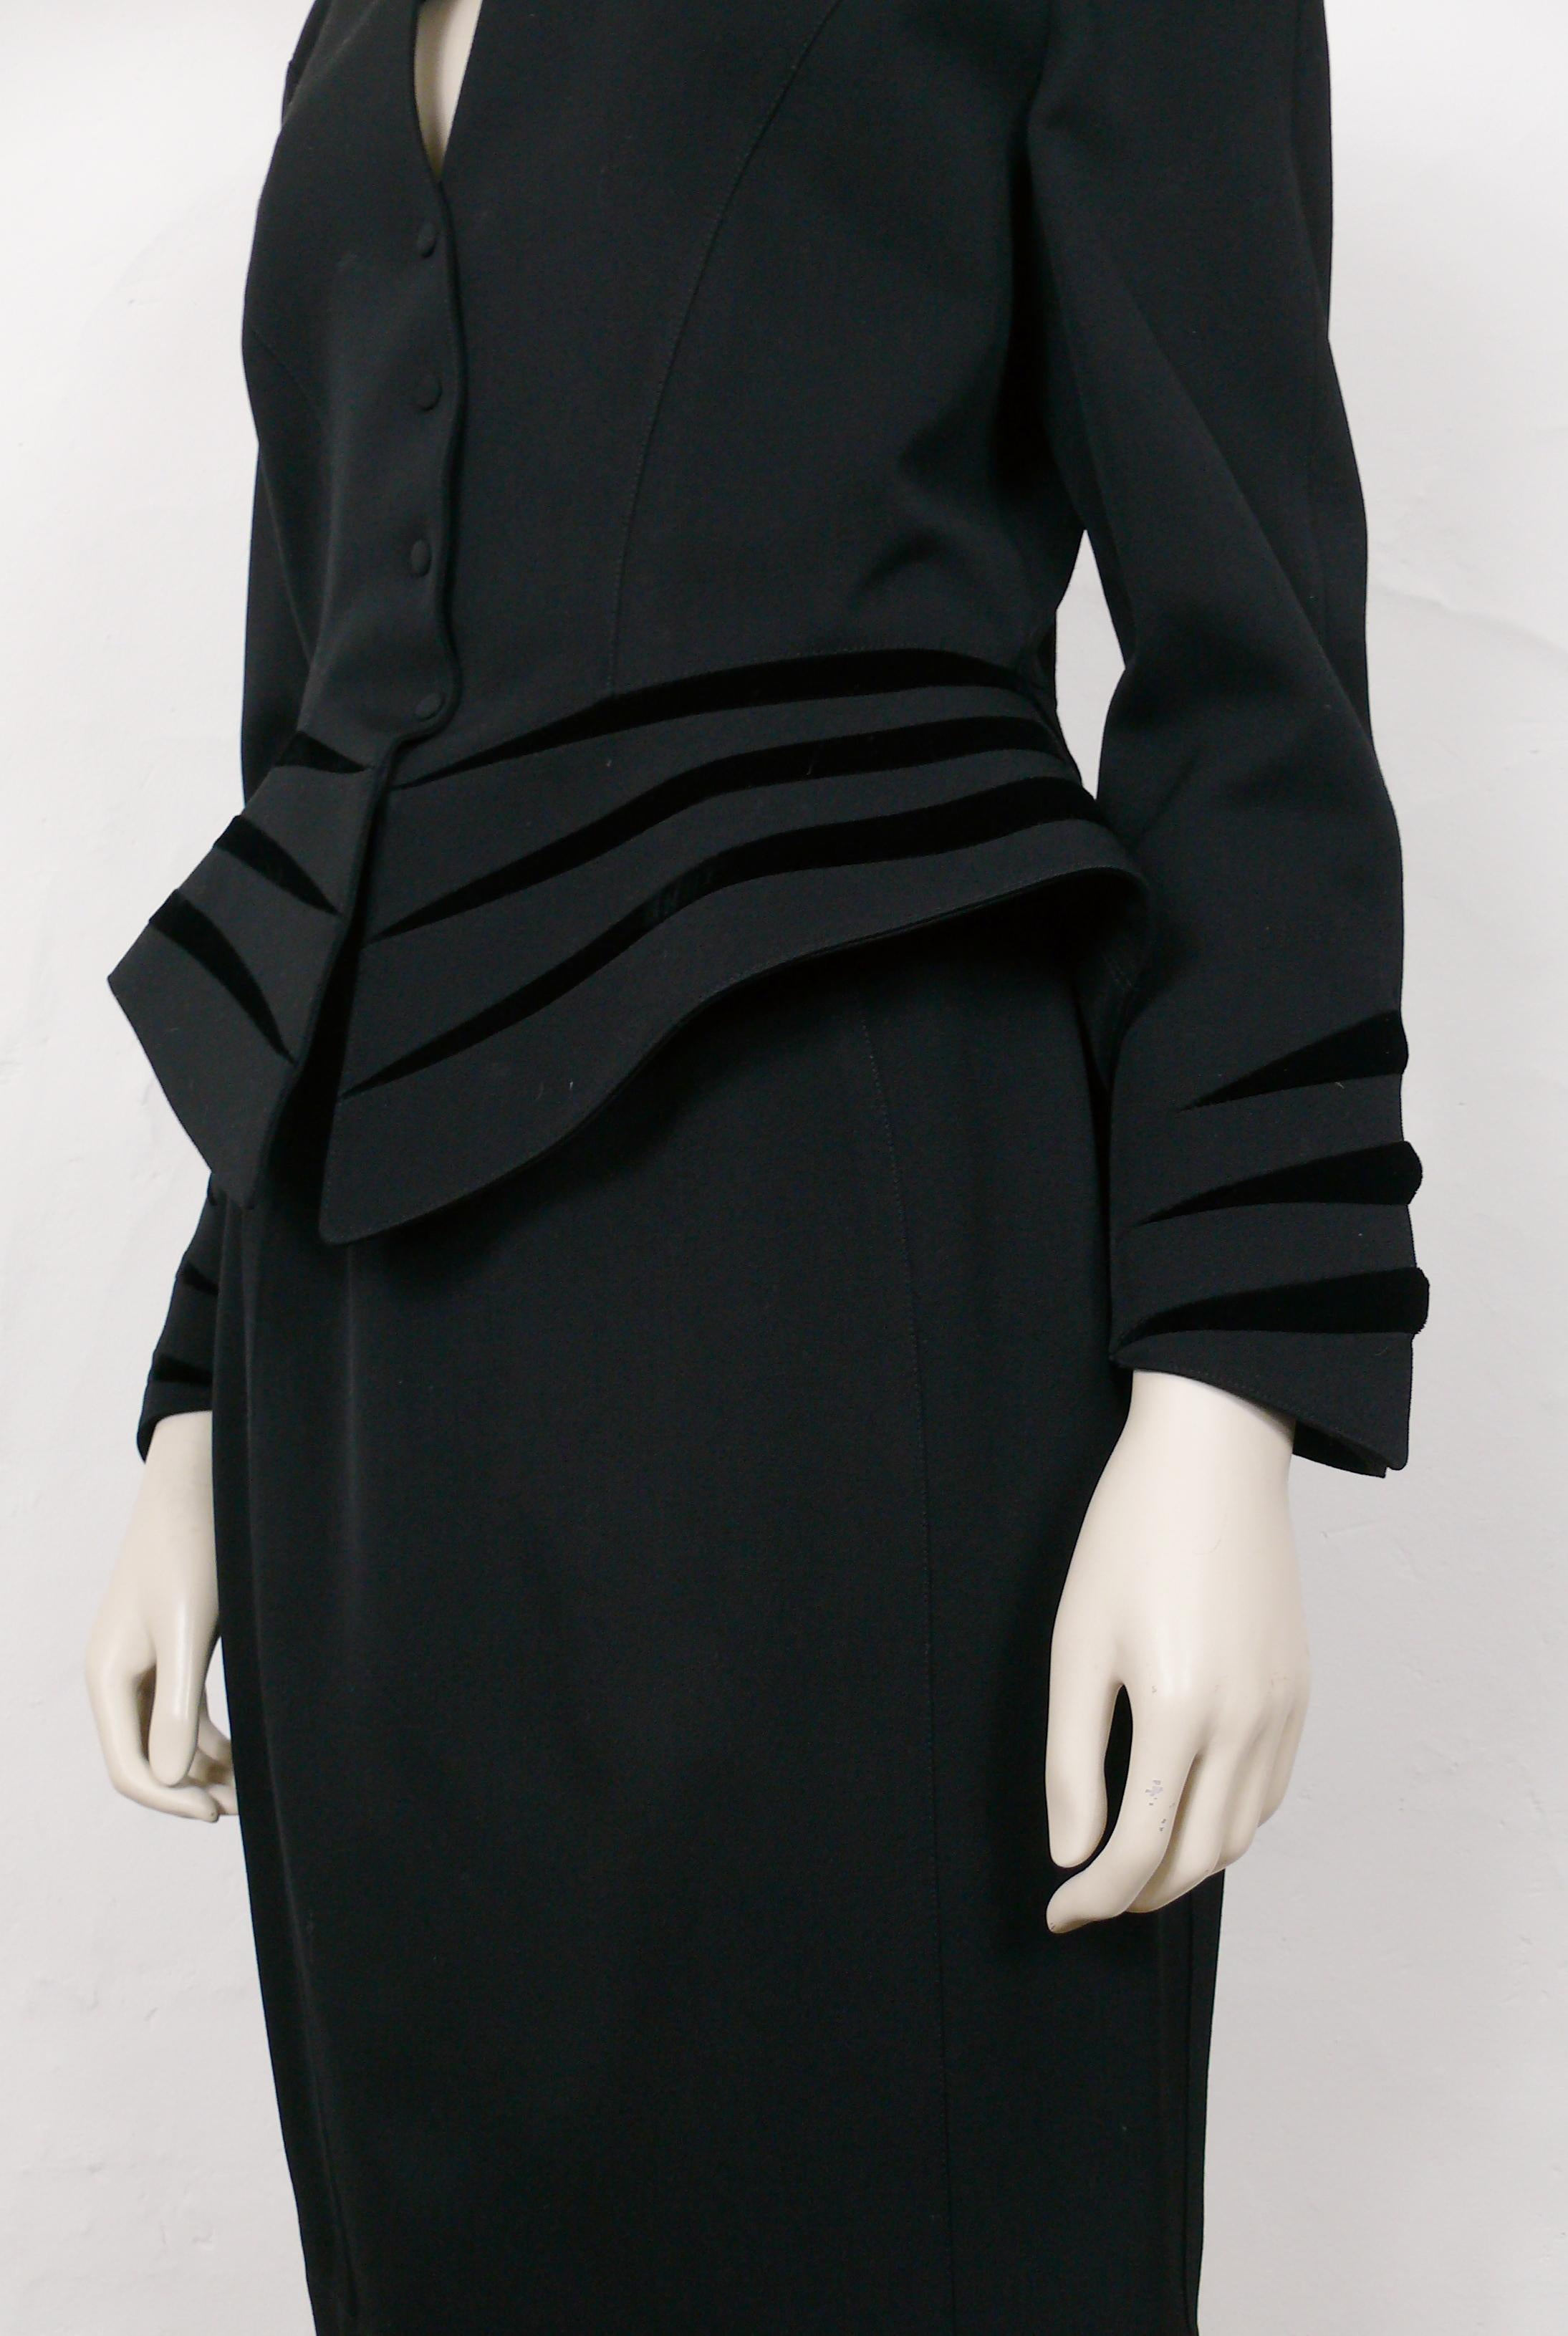 Thierry Mugler Vintage Iconic Black Worsted Wool and Velvet Claws Suit For Sale 4